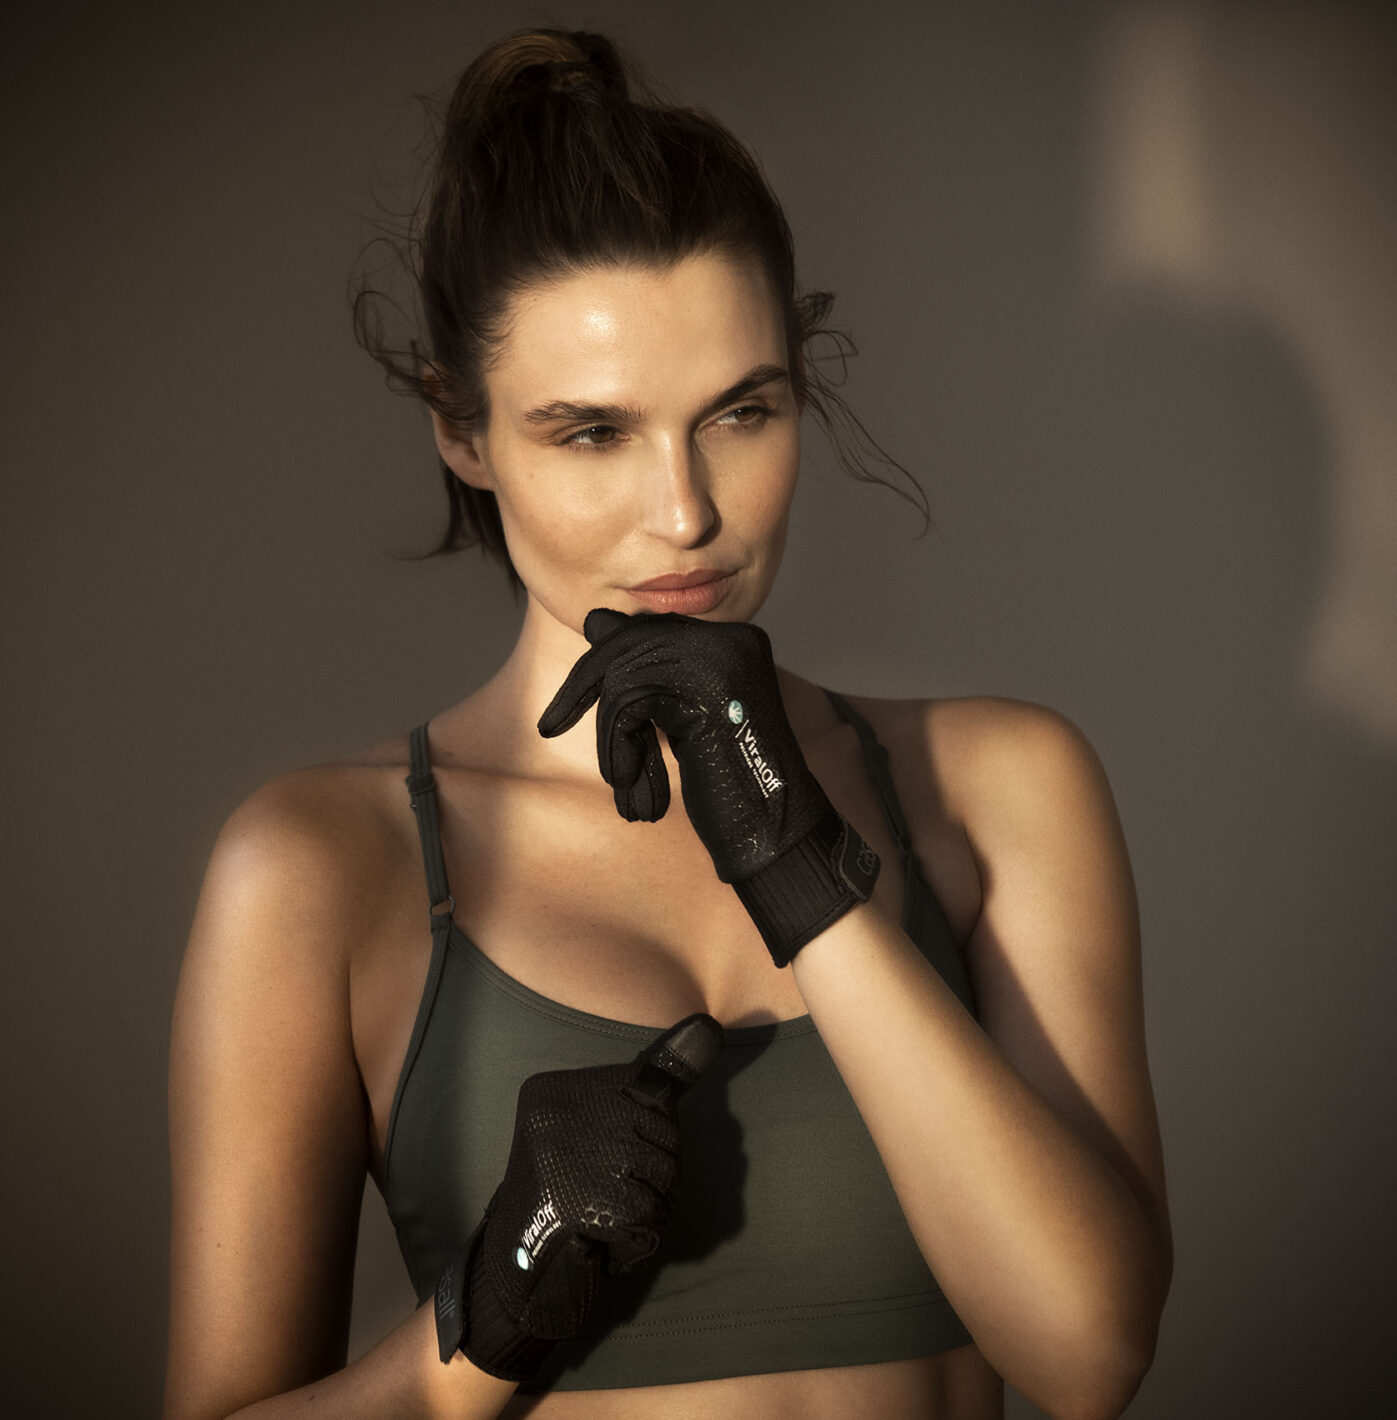 Tomorrow, January 26, Casall in collaboration with Polygiene launches a completely unique training glove treated with Polygiene ViralOff® technology. The treatment has in an ISO18184:2019 test* shown a reduction of virus by over 99% within 2 hours on treated materials. The test has been performed on the SARS-CoV-2 virus, causing COVID-19, among other viruses.